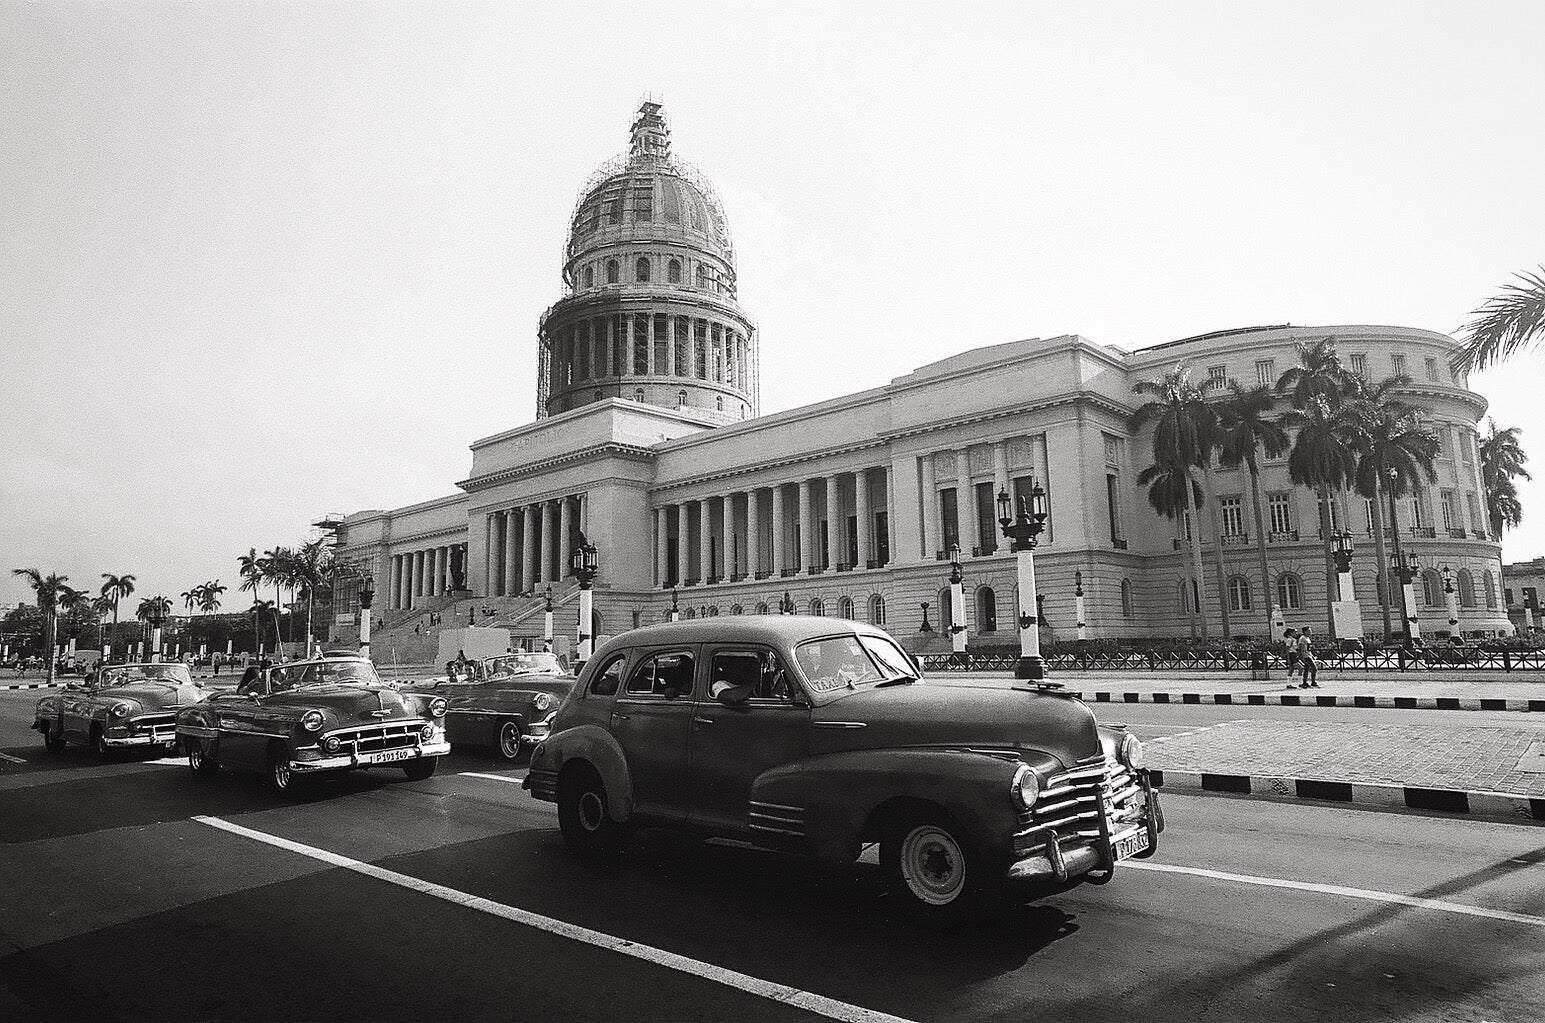 1950s American Cars Havana Cuba Black White Photography El Capitilo Dome Limited Edition Photo Print Fine Art Black And White Photography By